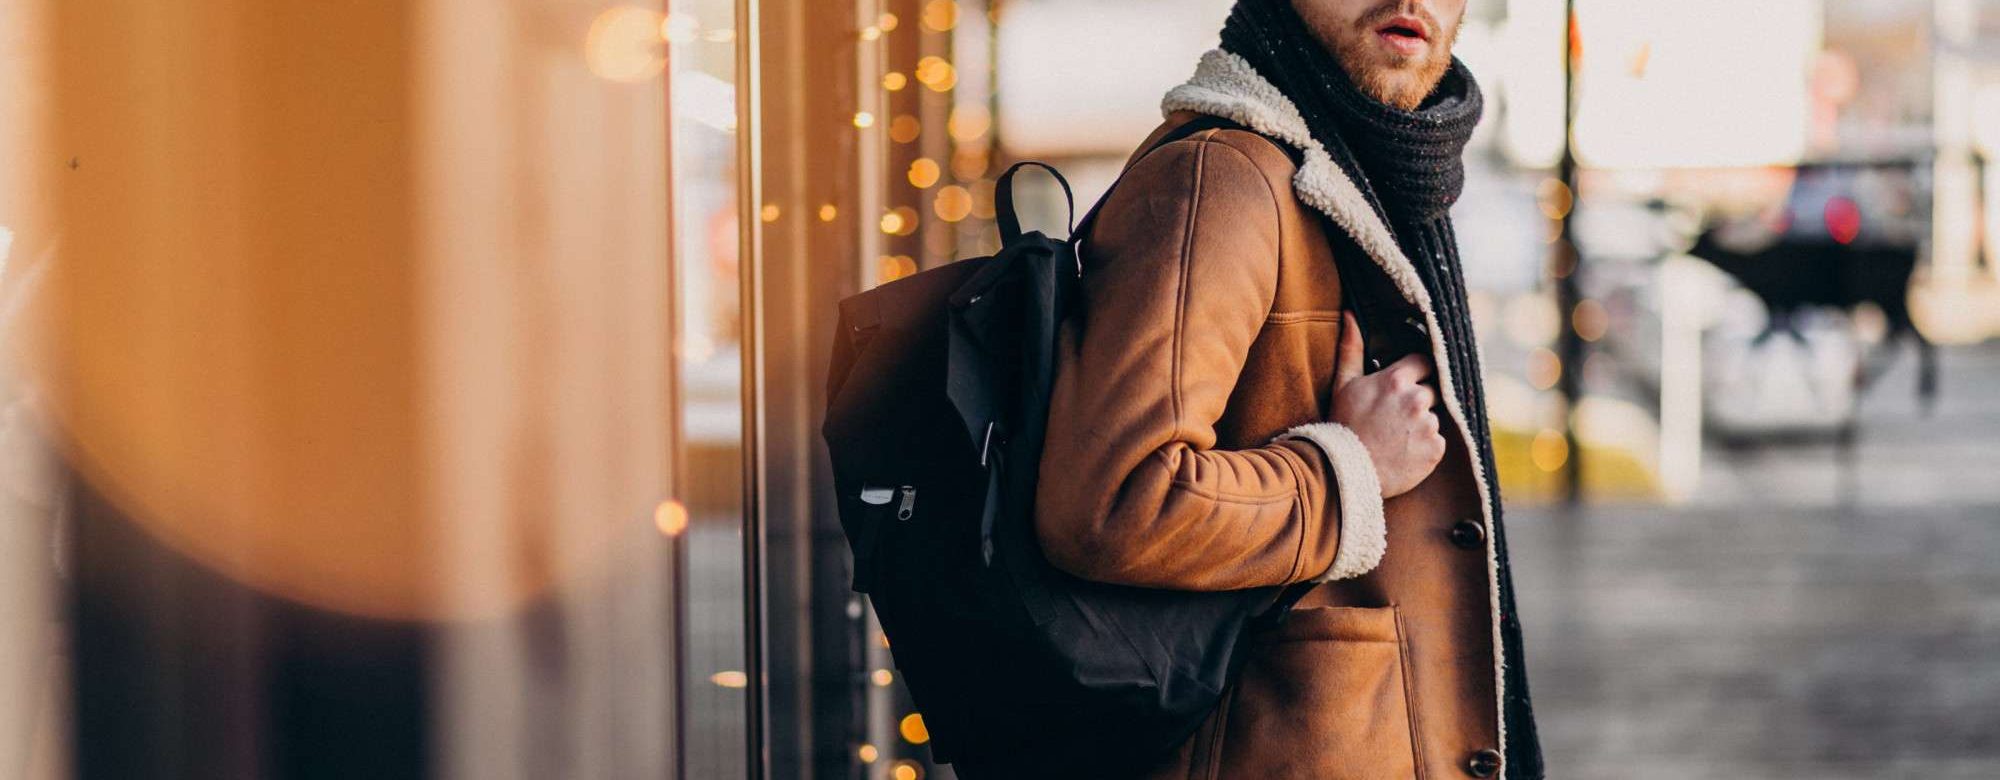 young-handsome-man-with-winter-clothes-backpack